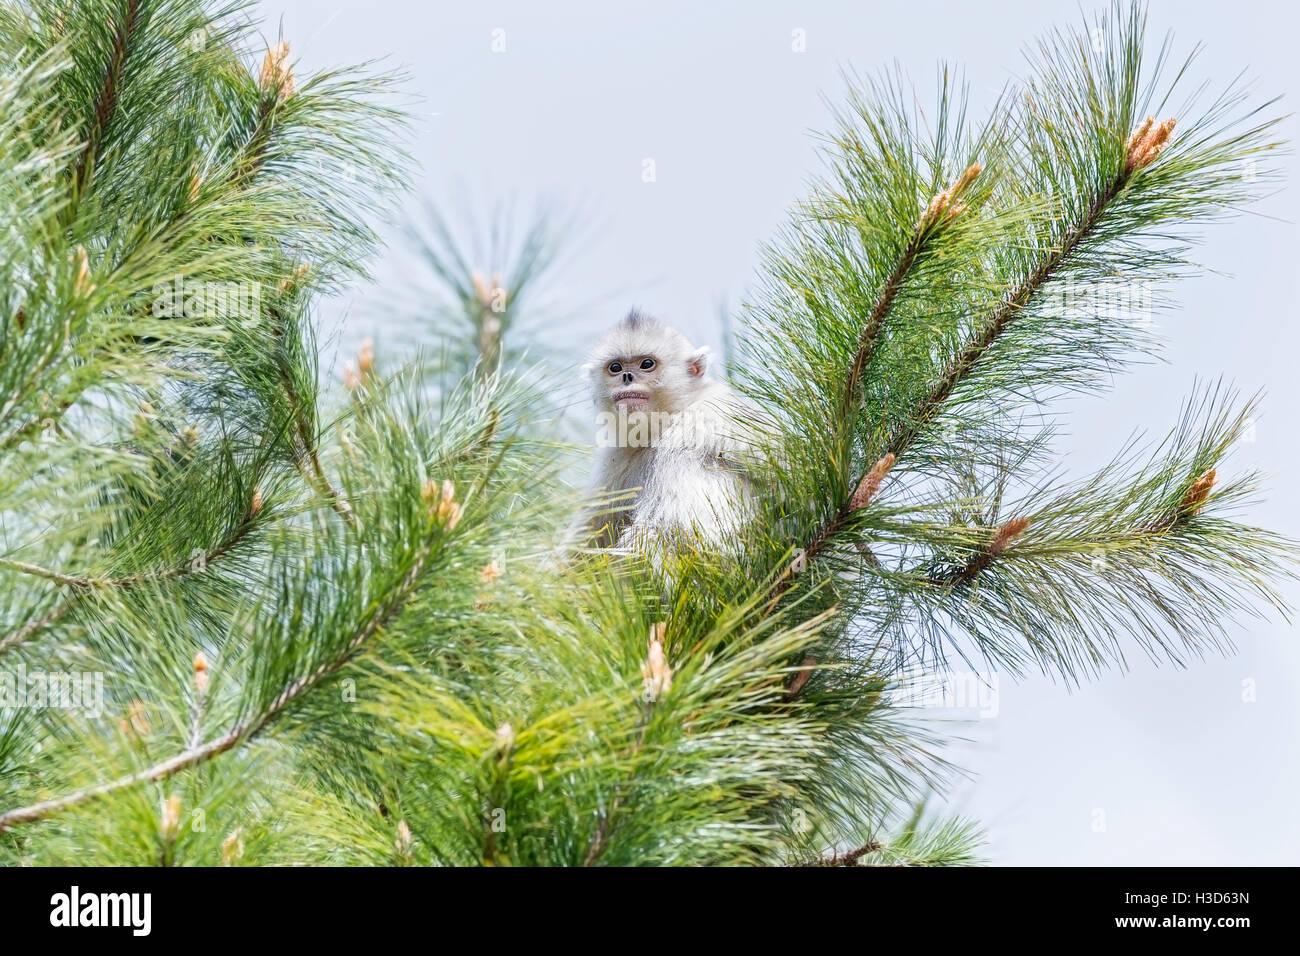 A young Black snub-nosed monkey sitting on the branches of a conifer tree in a Himalayan forest, Yunnan, China Stock Photo